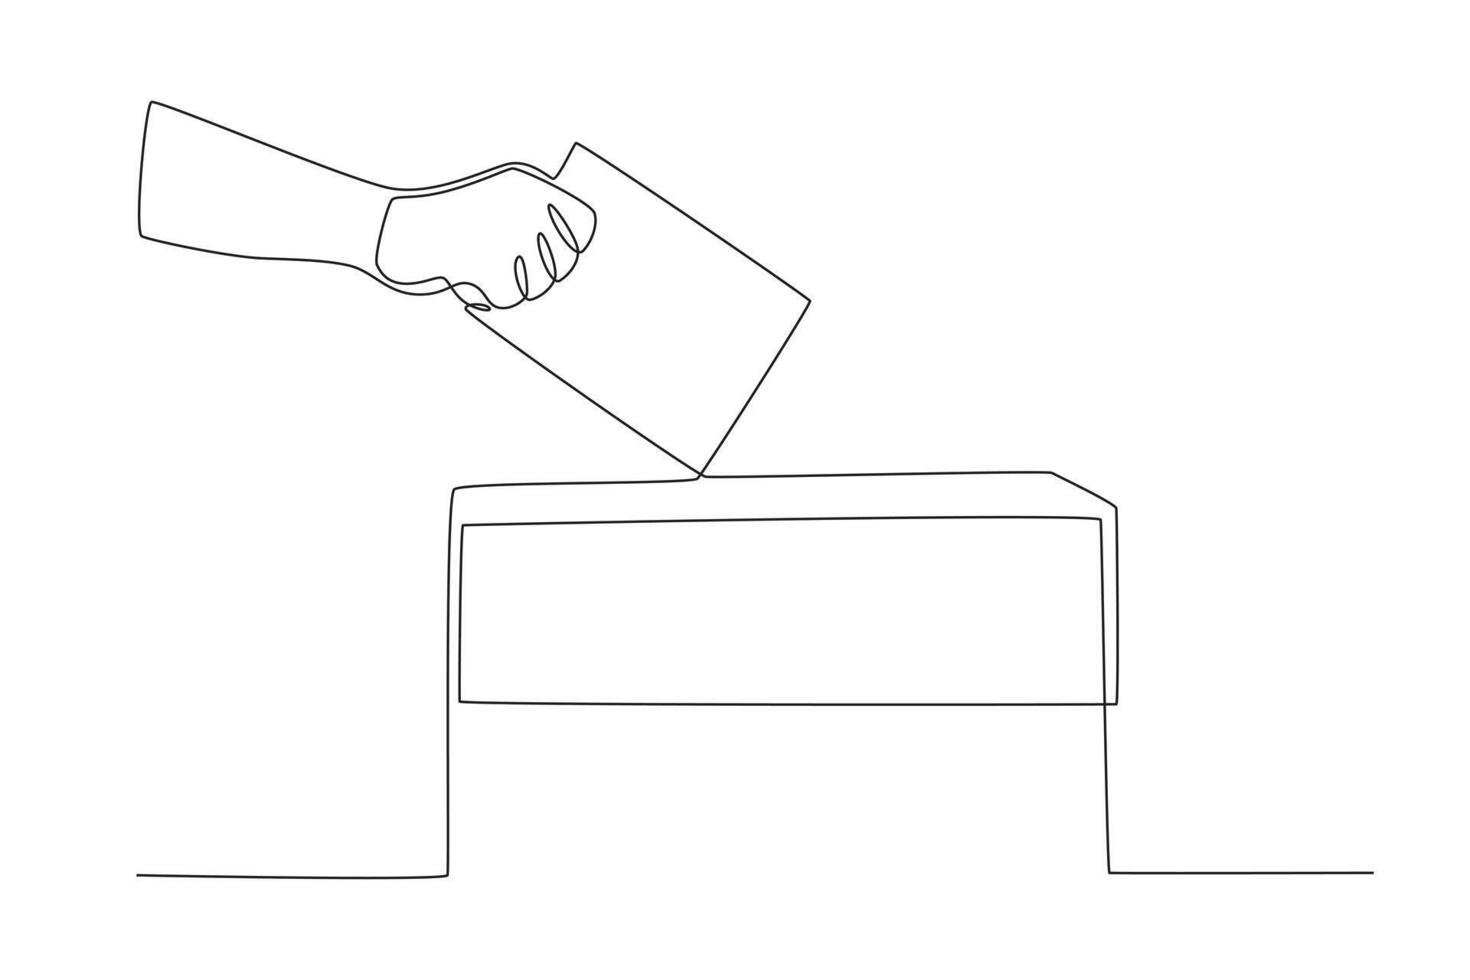 The ballot paper is folded into a rectangle and then placed in the box vector